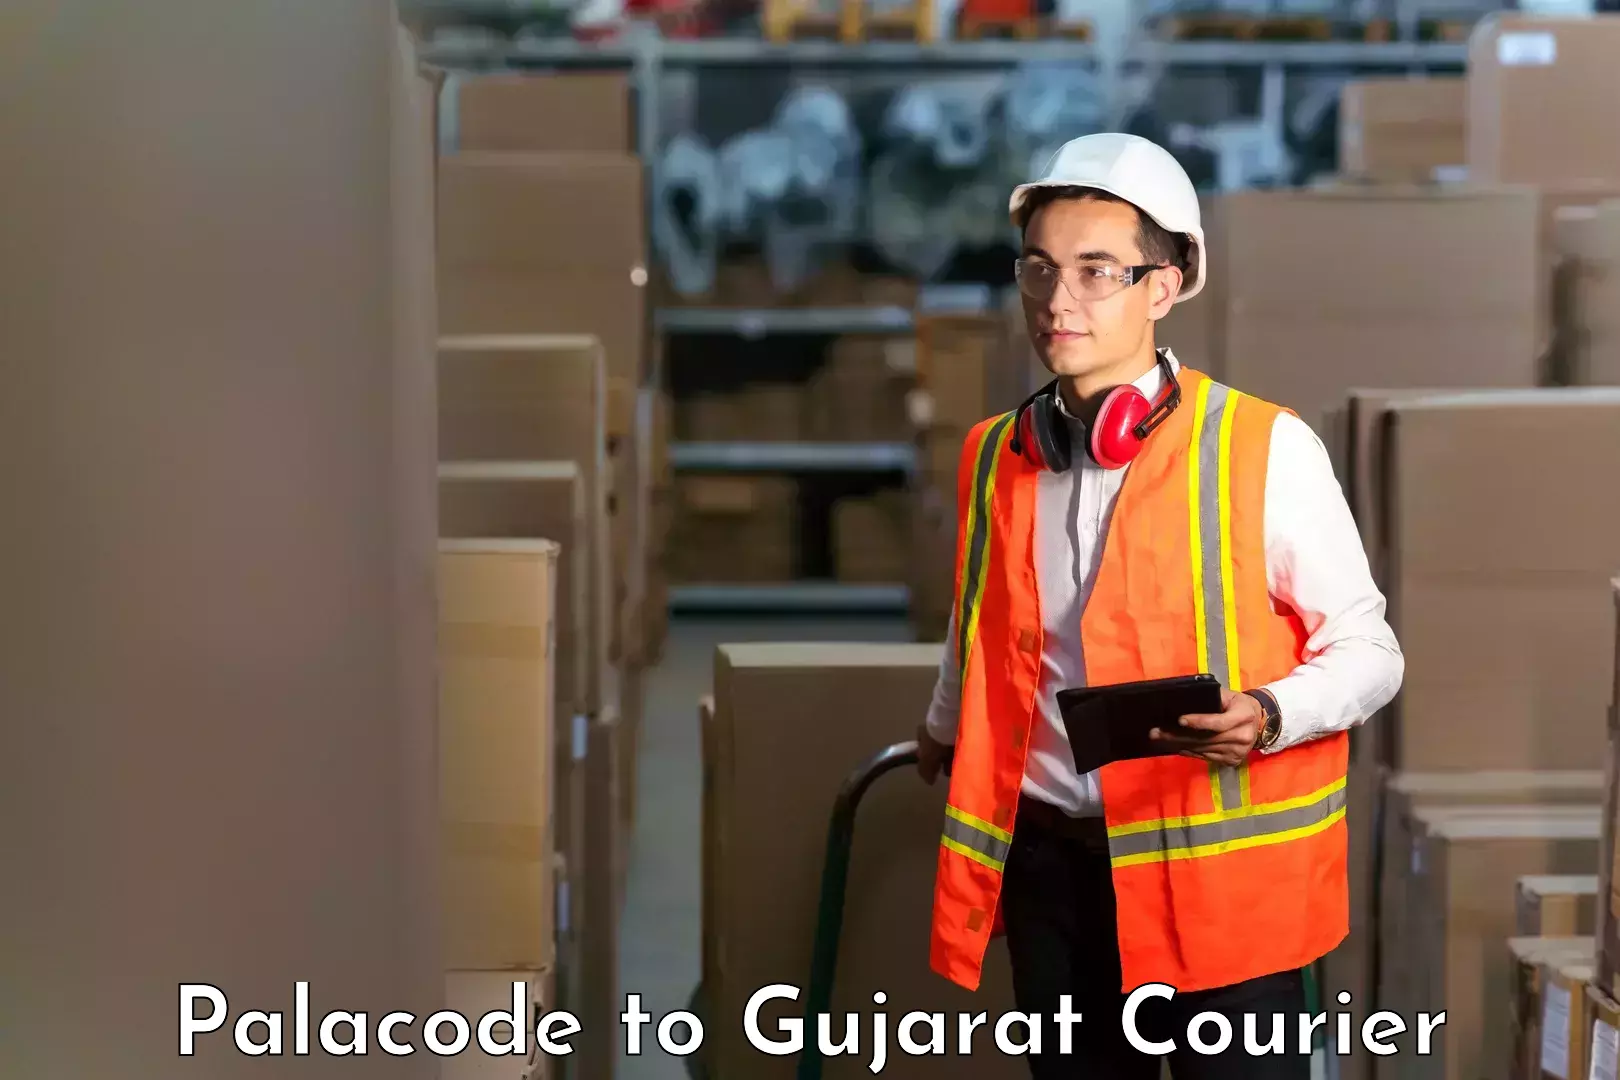 Business delivery service Palacode to Gujarat